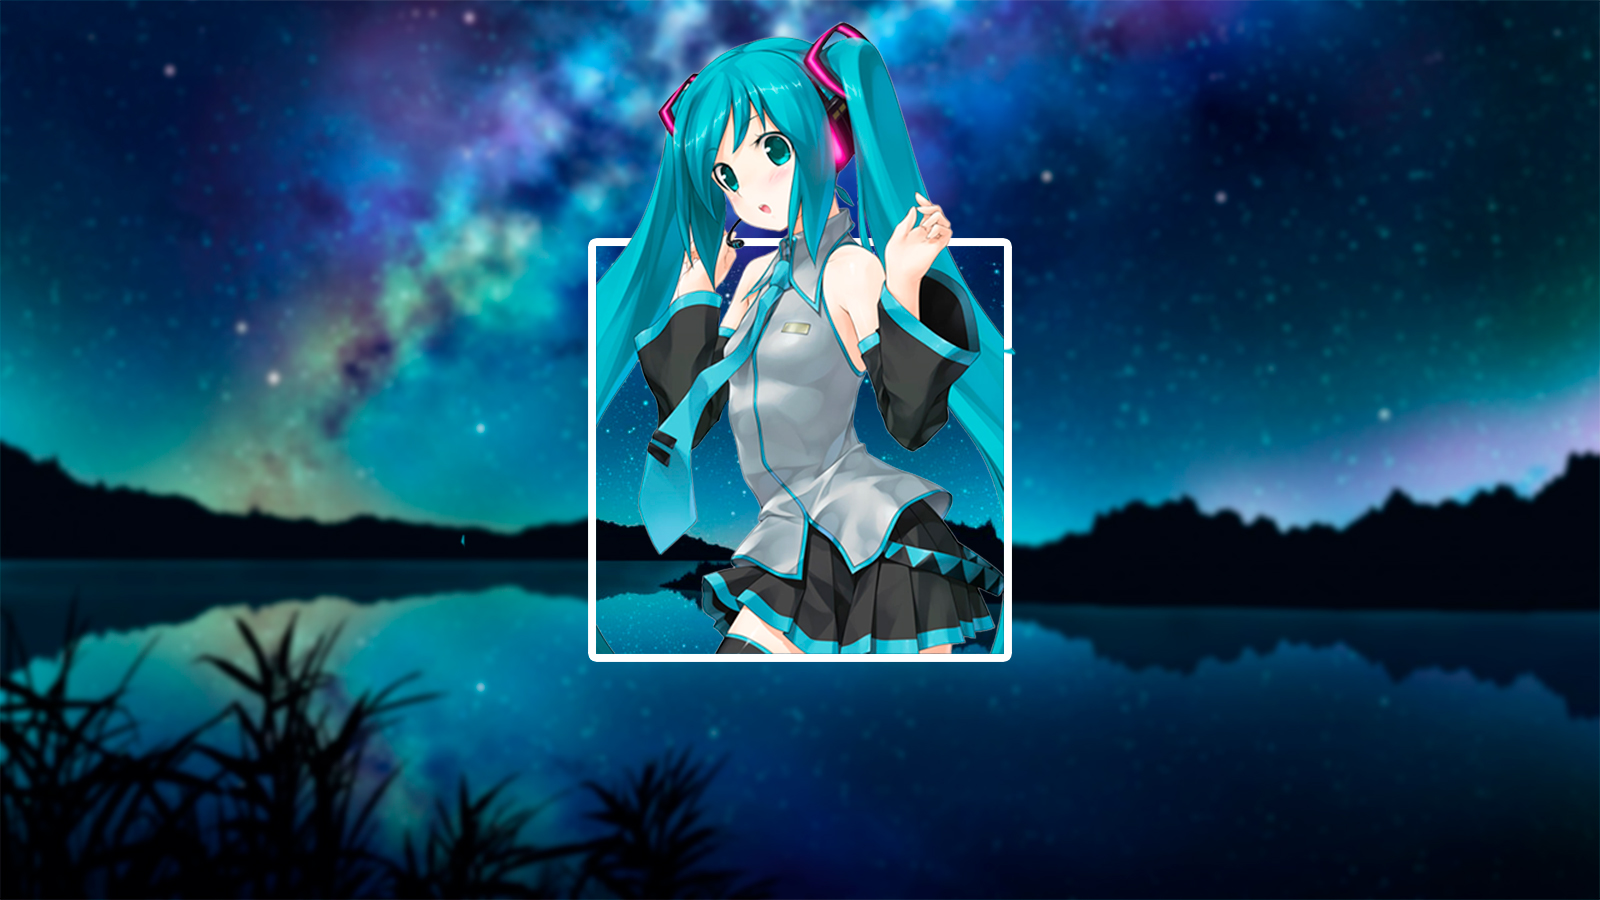 Anime 1600x900 anime anime girls Hatsune Miku Vocaloid picture-in-picture